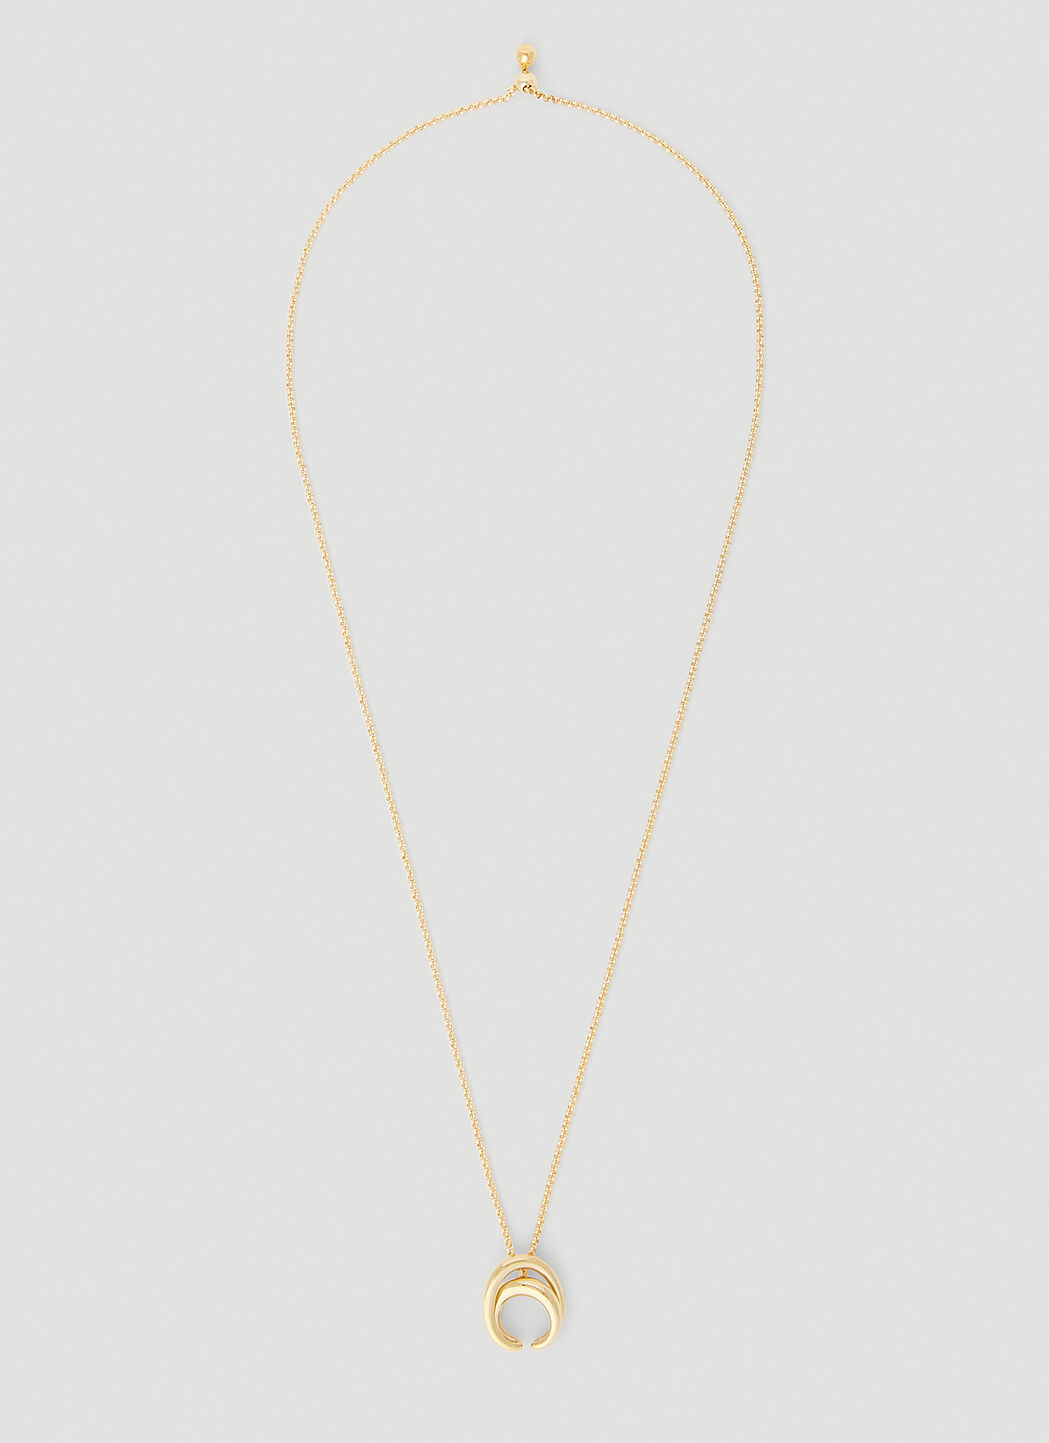 Charlotte CHESNAIS Initial Necklace Gold ccn0254001